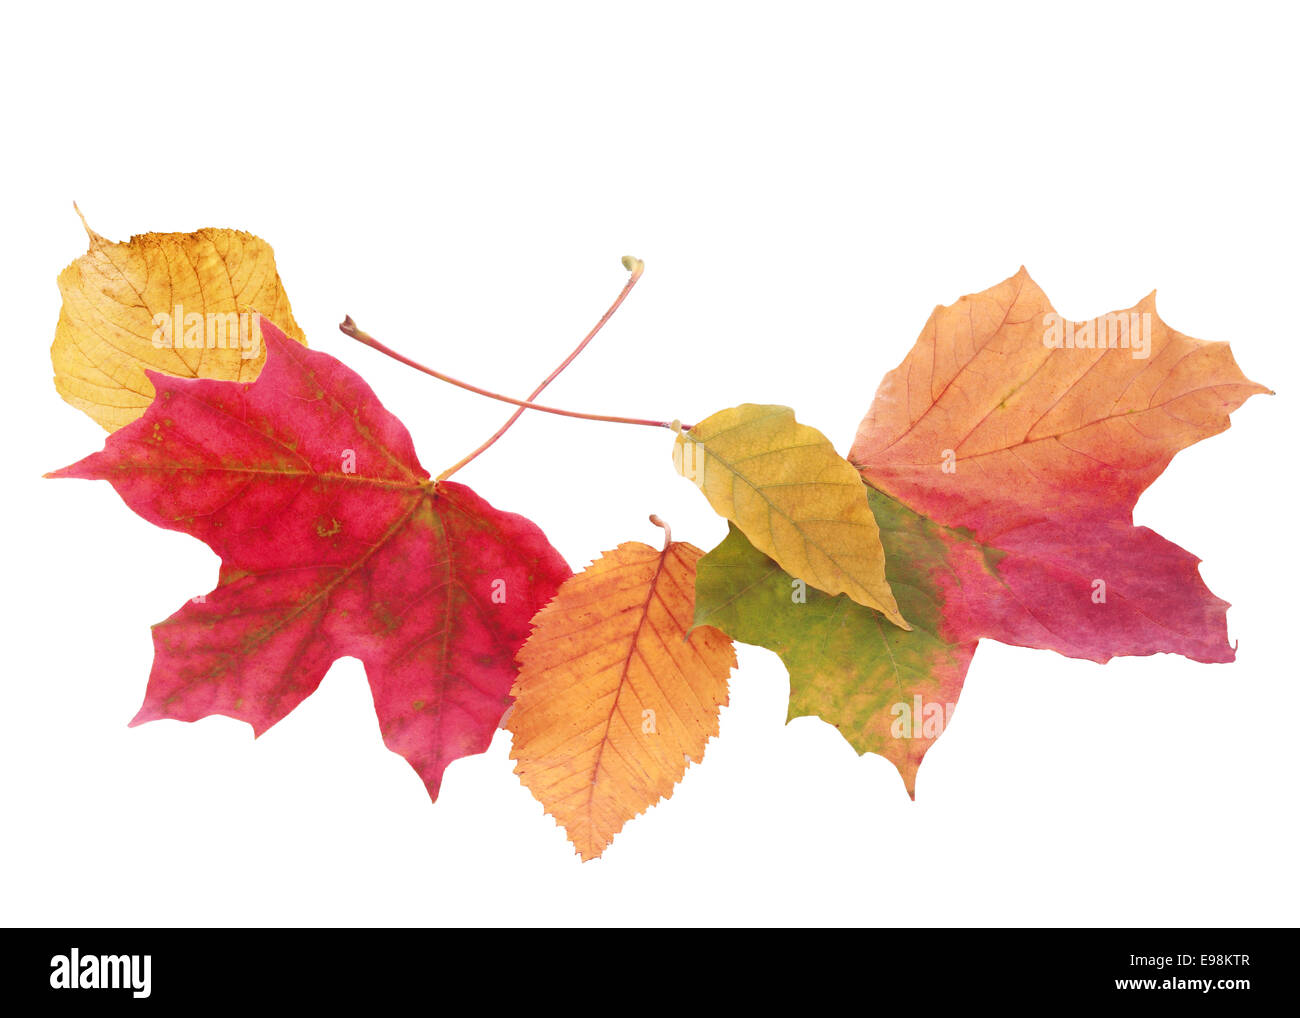 Fanned arrangement of beautiful colorful autmn or fall leaves in a variety of shapes and colors isolated on white with copyspace Stock Photo